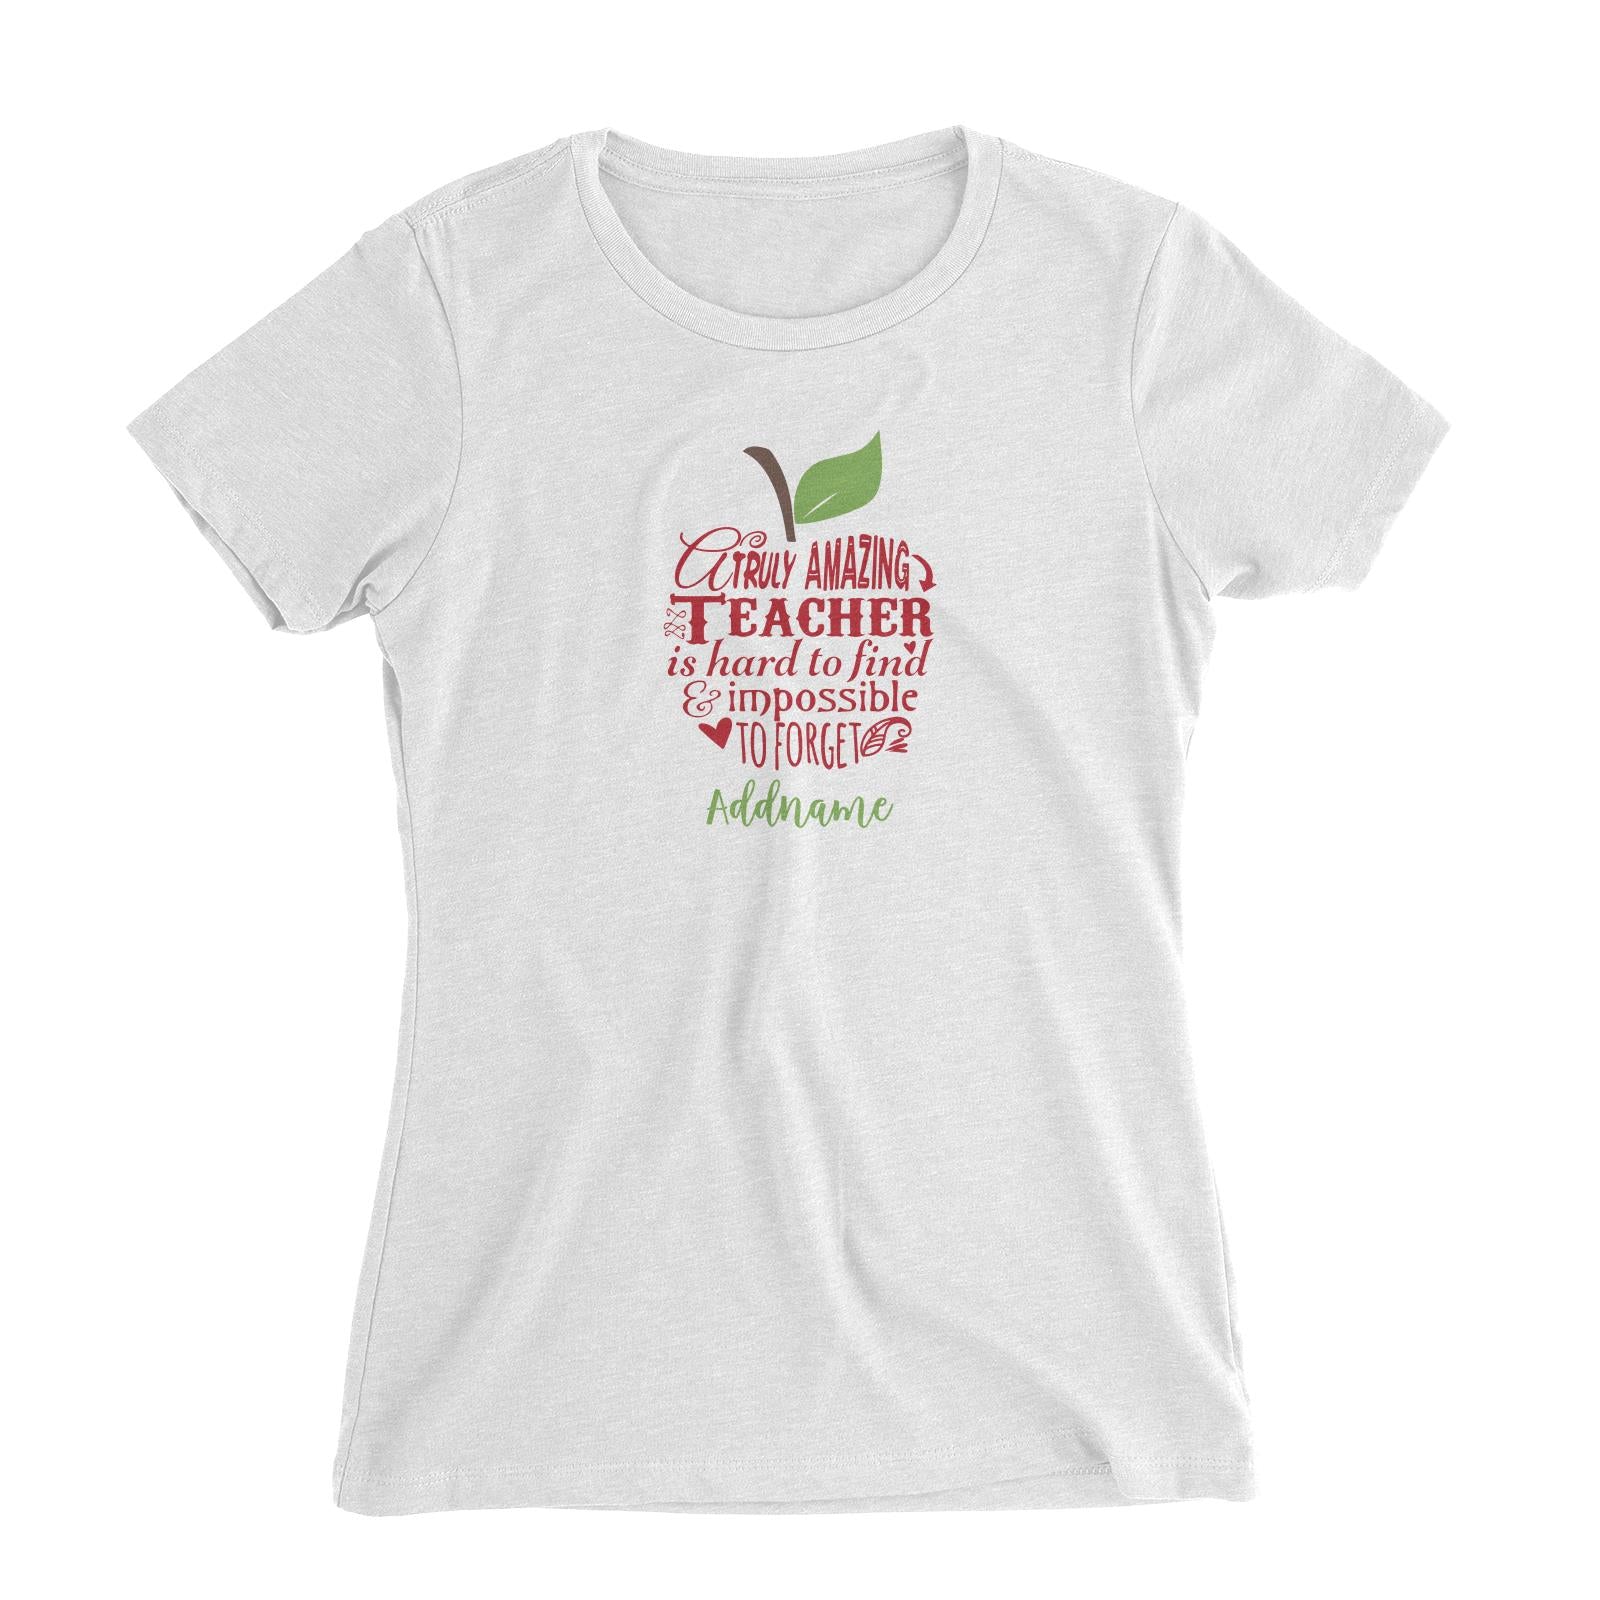 Teacher Apple Truly Amazing Teacher is Had To Find & Impossible To Forget Addname Women's Slim Fit T-Shirt